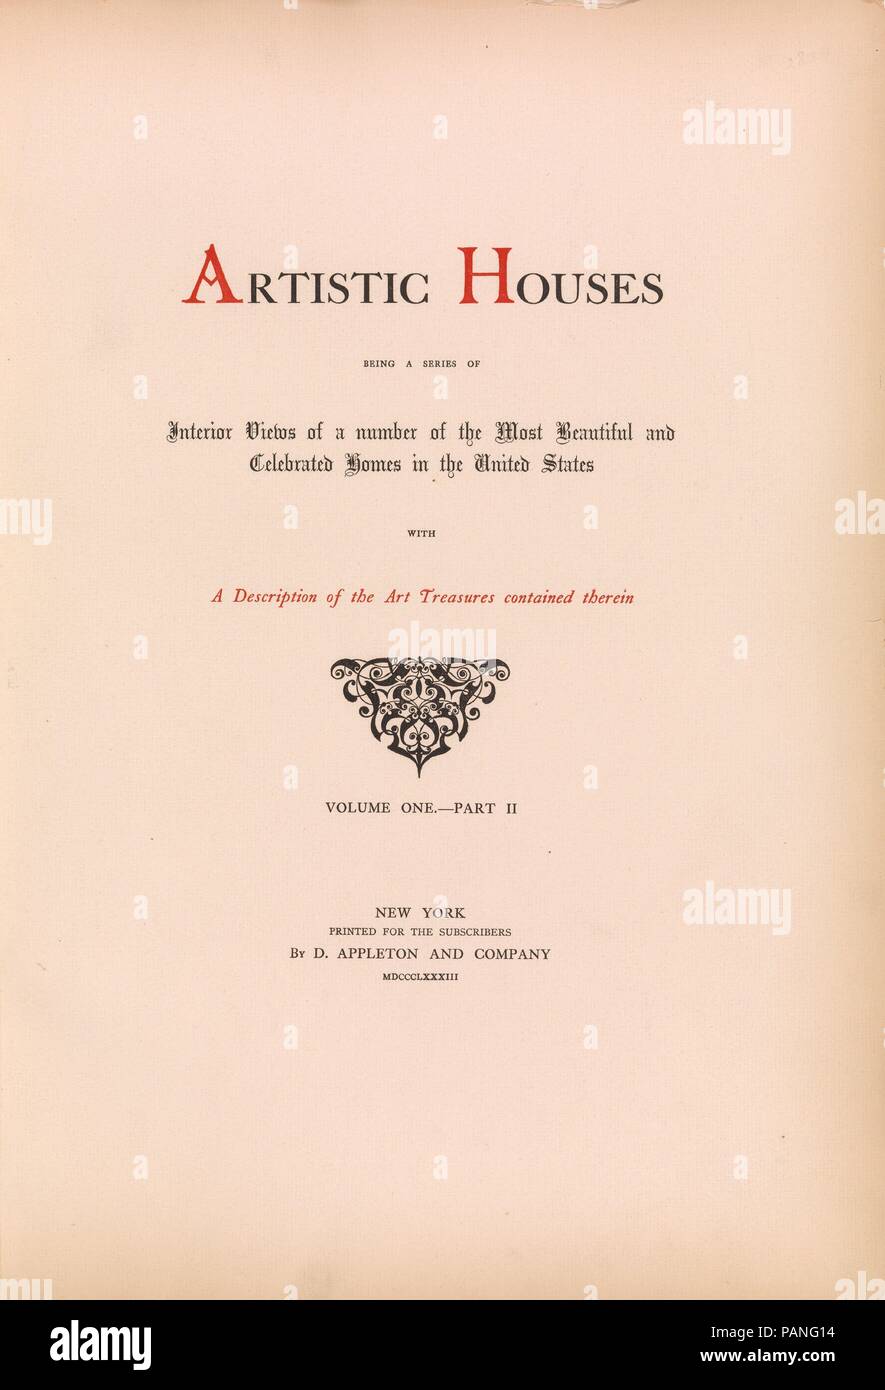 Artistic houses : being a series of interior views of a number of the most beautiful and celebrated homes in the United States : with a description of the art treasures contained therein. Dimensions: 2 volumes in 4, [193] leaves of plates ; Height: 20 1/2 in. (52 cm). Publisher: D. Appleton & Co.. Date: 1883-84.  'Edition limited to 500 copies' -- p. [3] of volume 1. Title in red and black; vignette. Watson Library copy: No. 320 of 500 copies printed. Museum: Metropolitan Museum of Art, New York, USA. Stock Photo